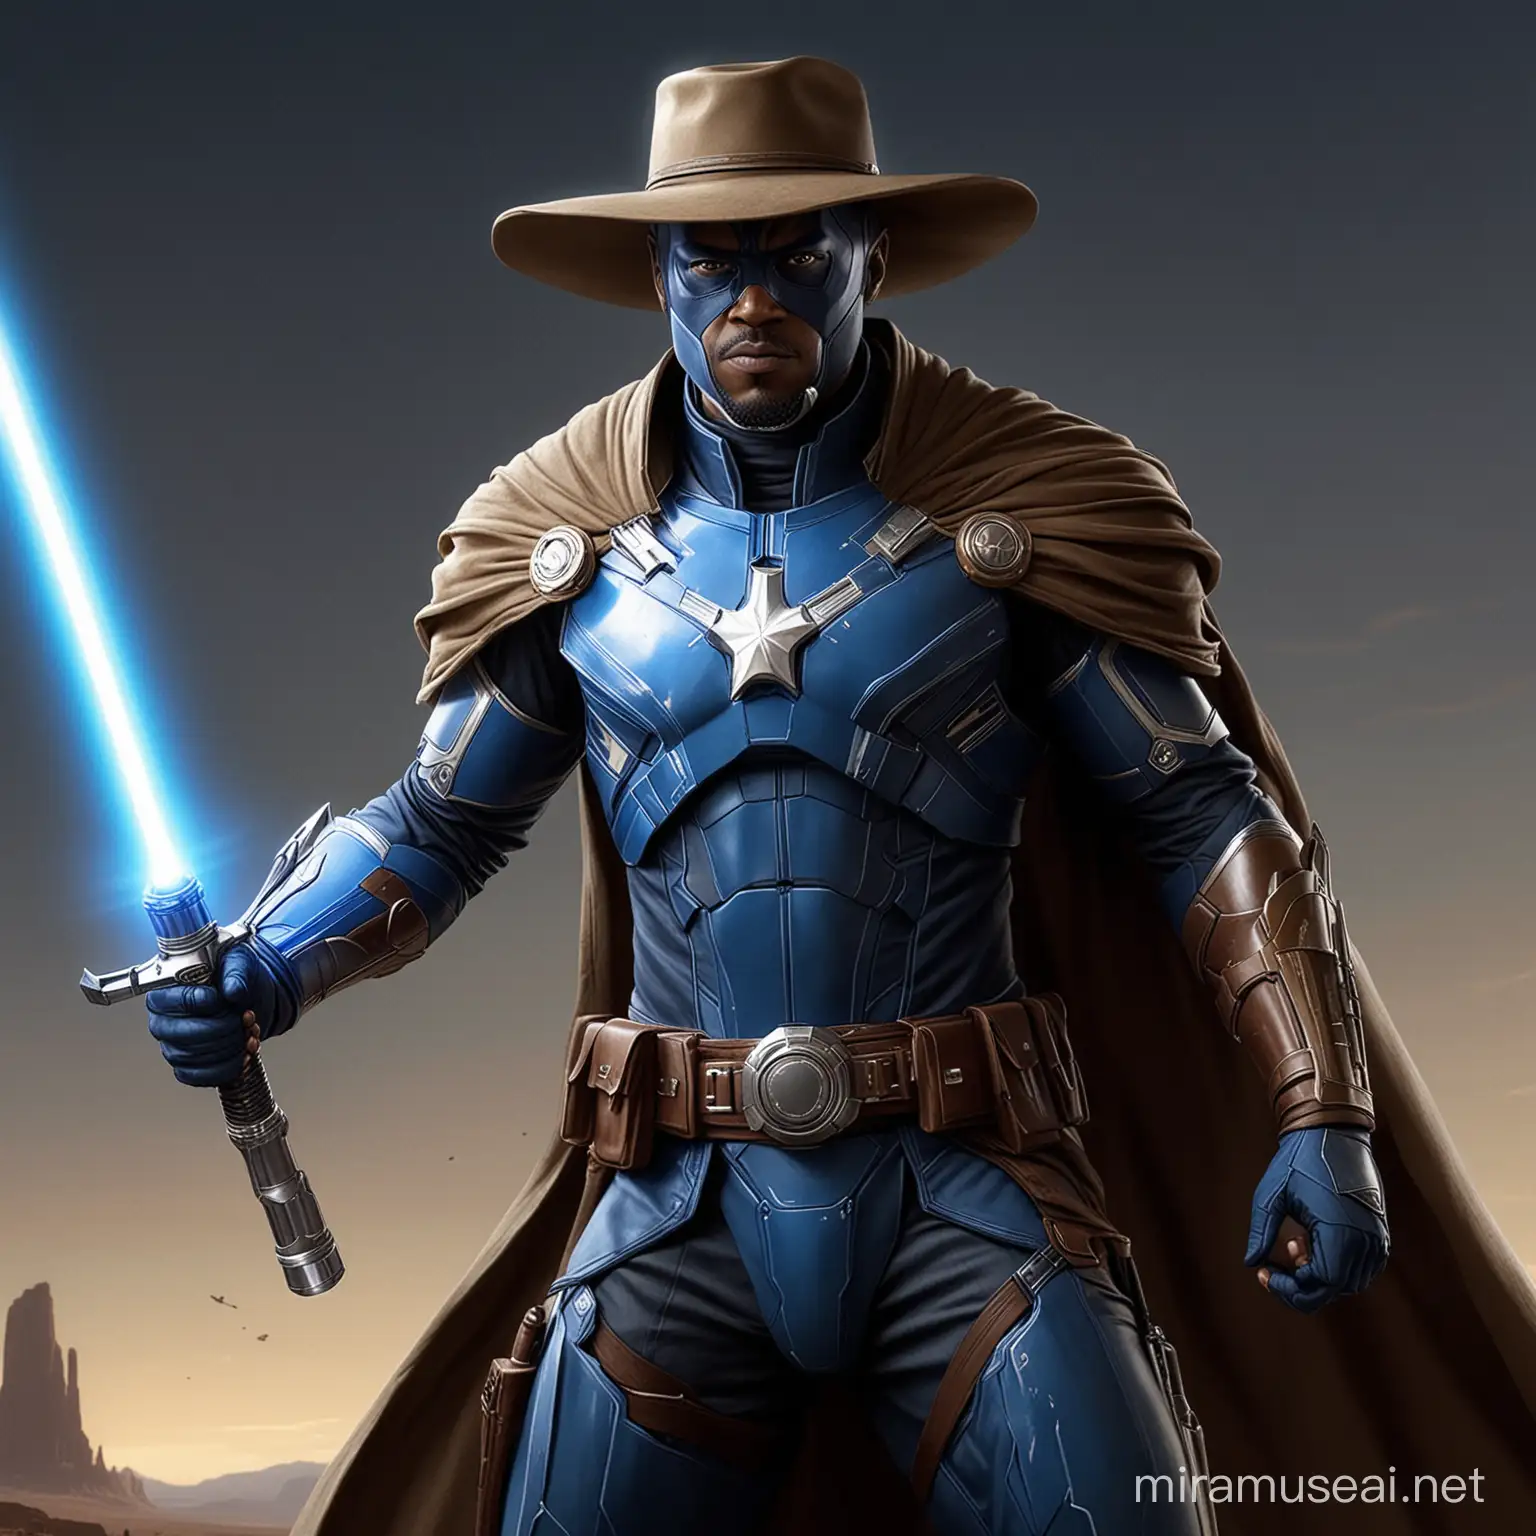 Hyper Realistic Blue Marvel as Star Wars Jedi with Blue Armor and Brown Cowboy Hat Holding White Lightsaber